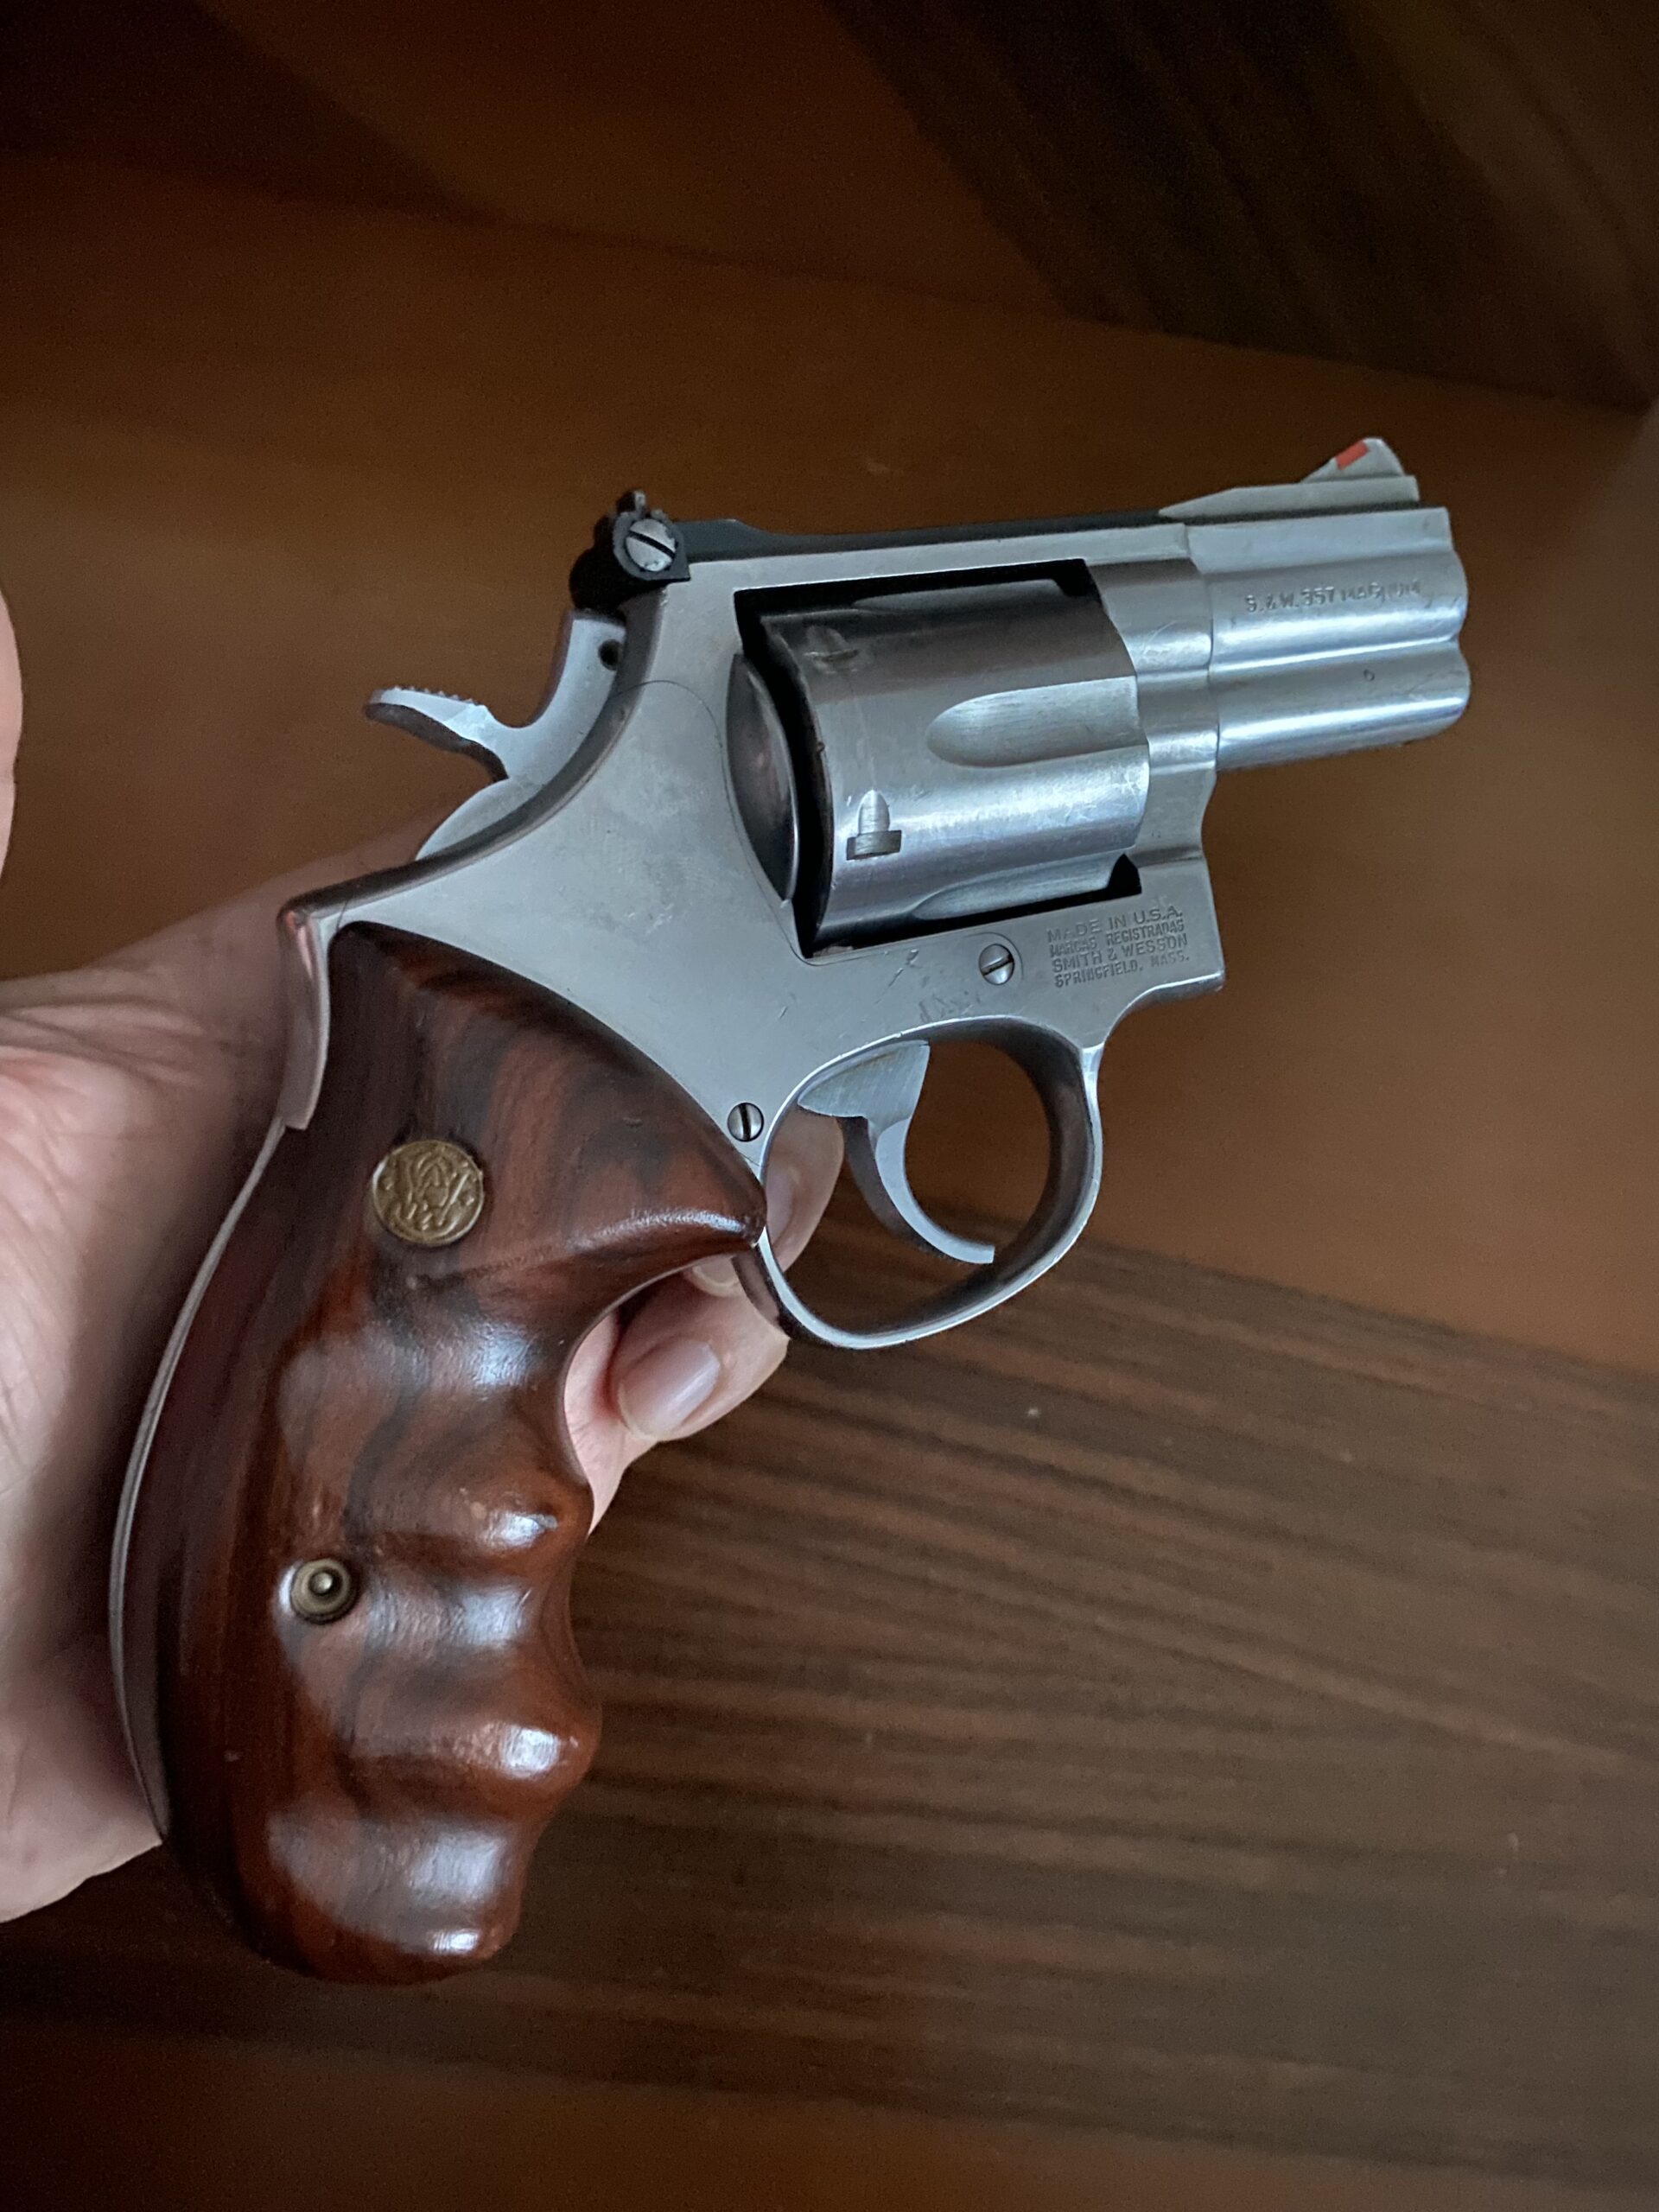 3.57 MAGNUM SMİTH WESSON MODEL 686-3